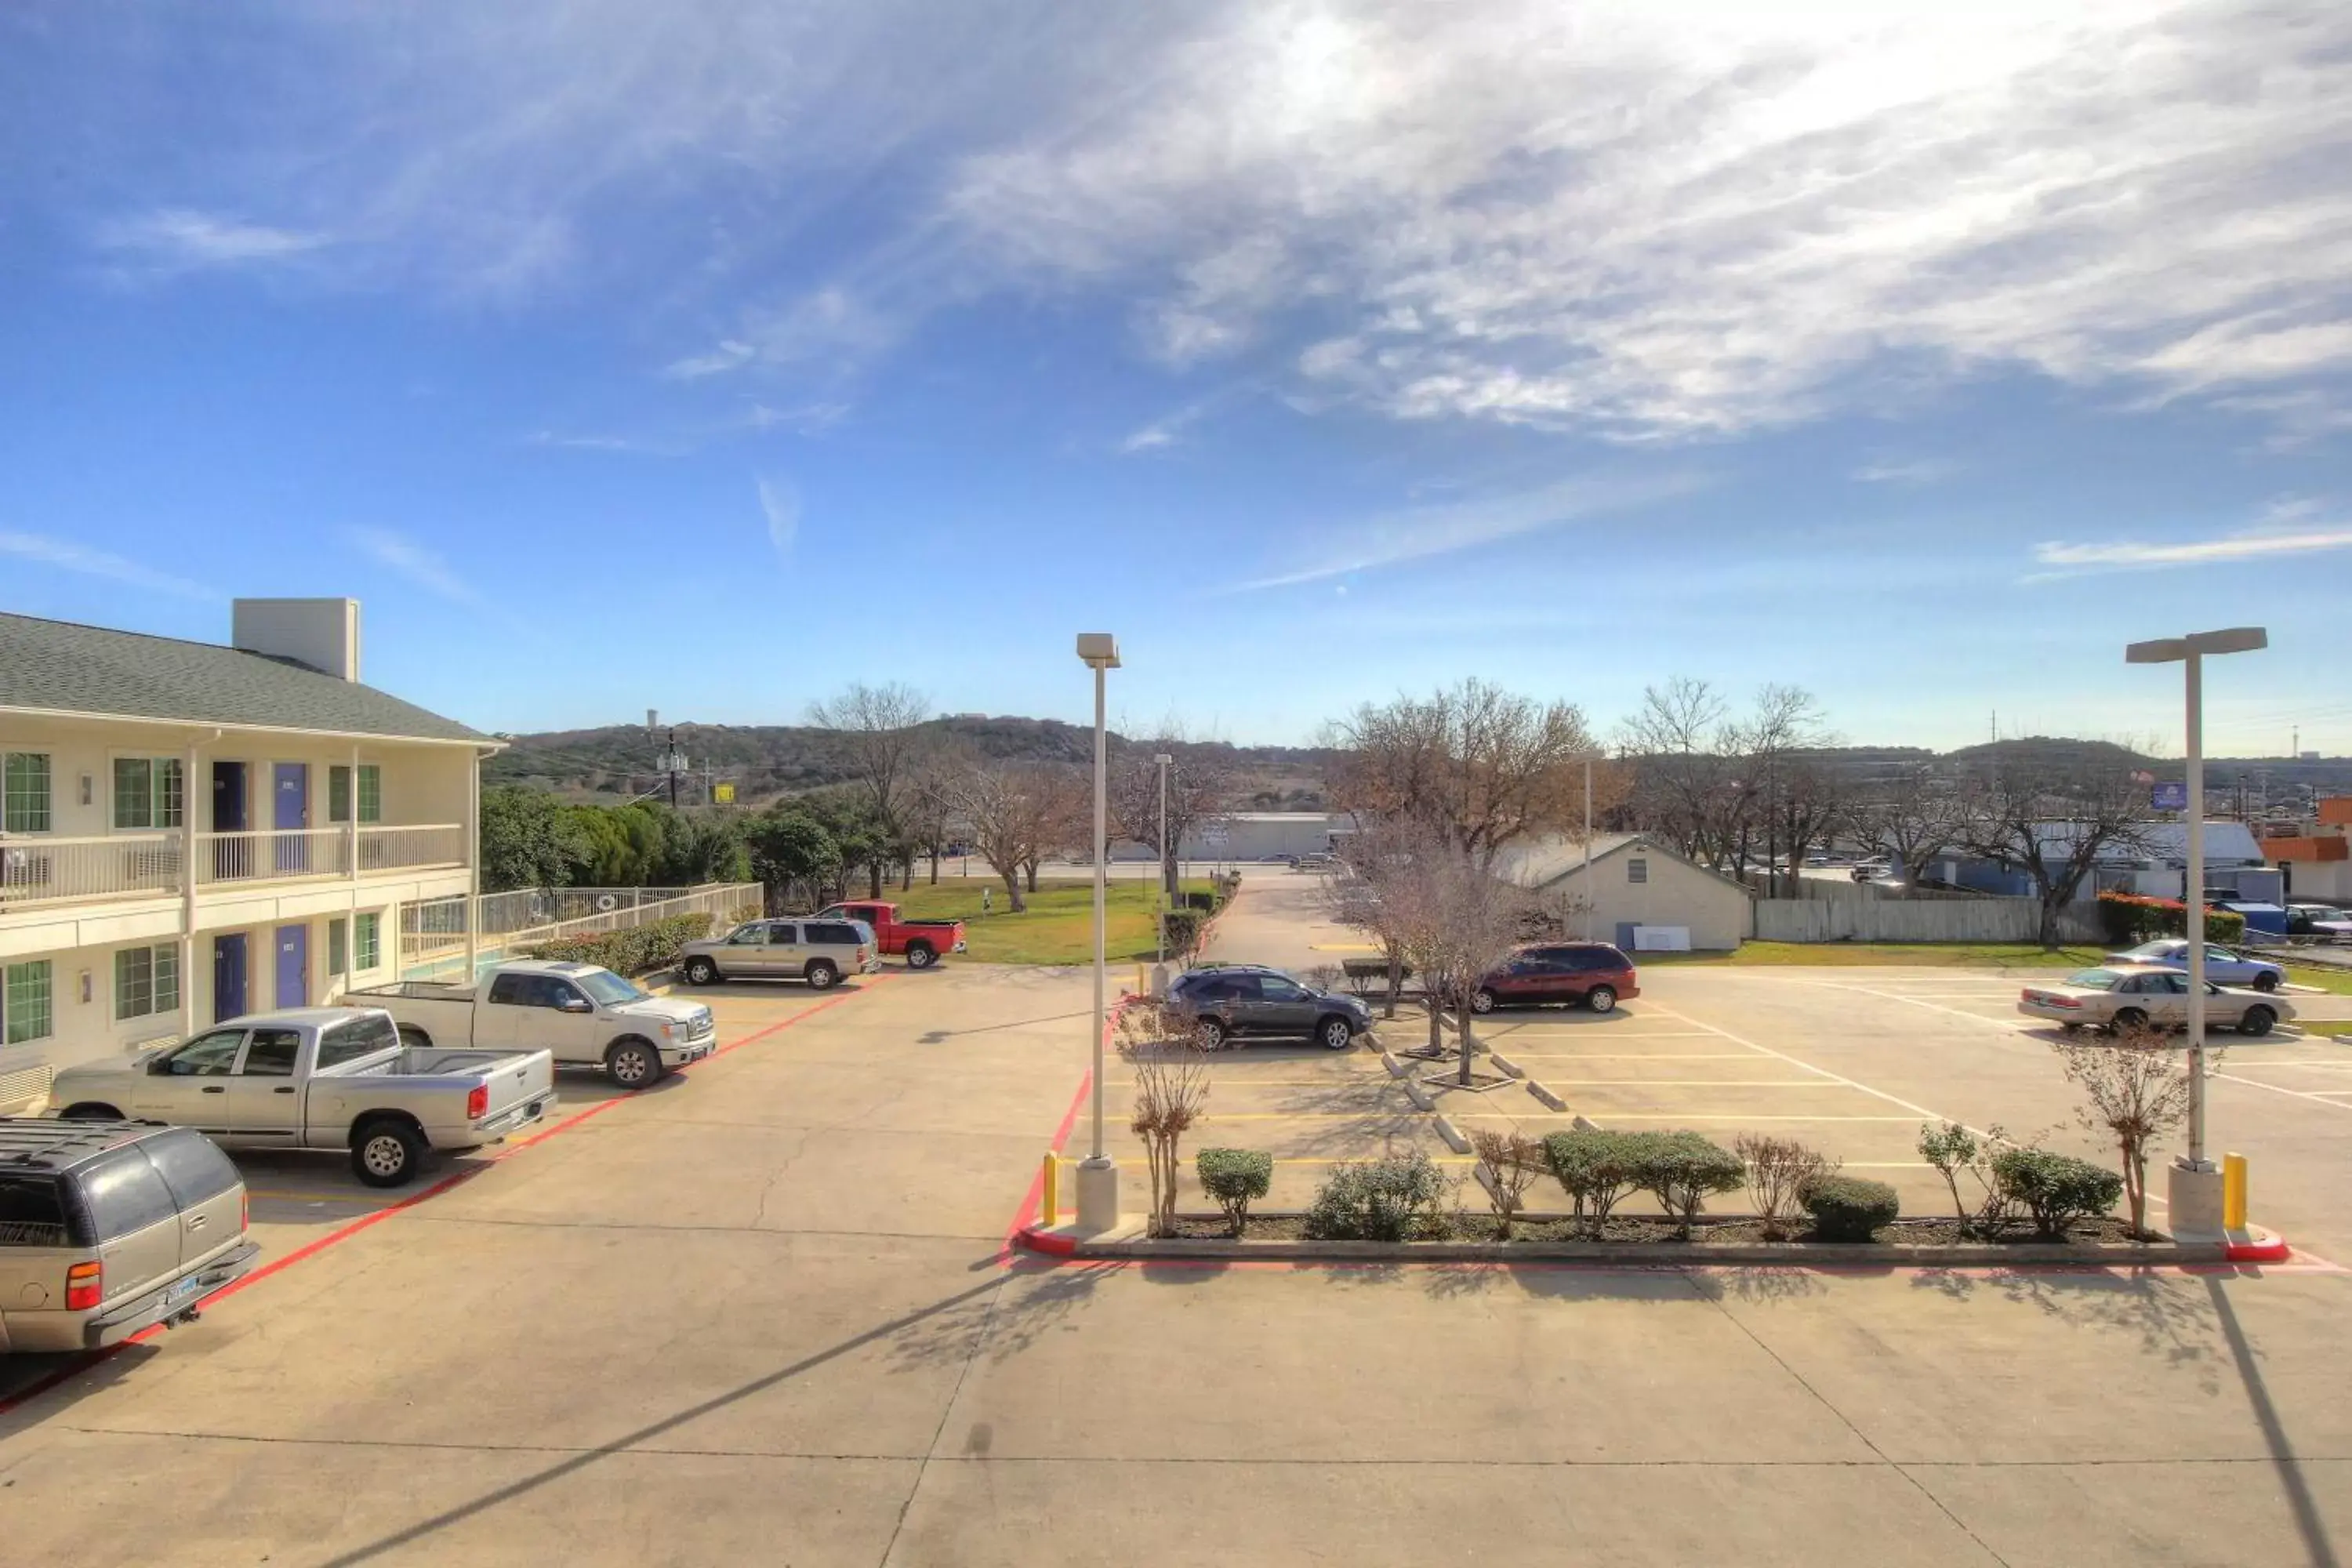 Area and facilities in Motel 6-Kerrville, TX